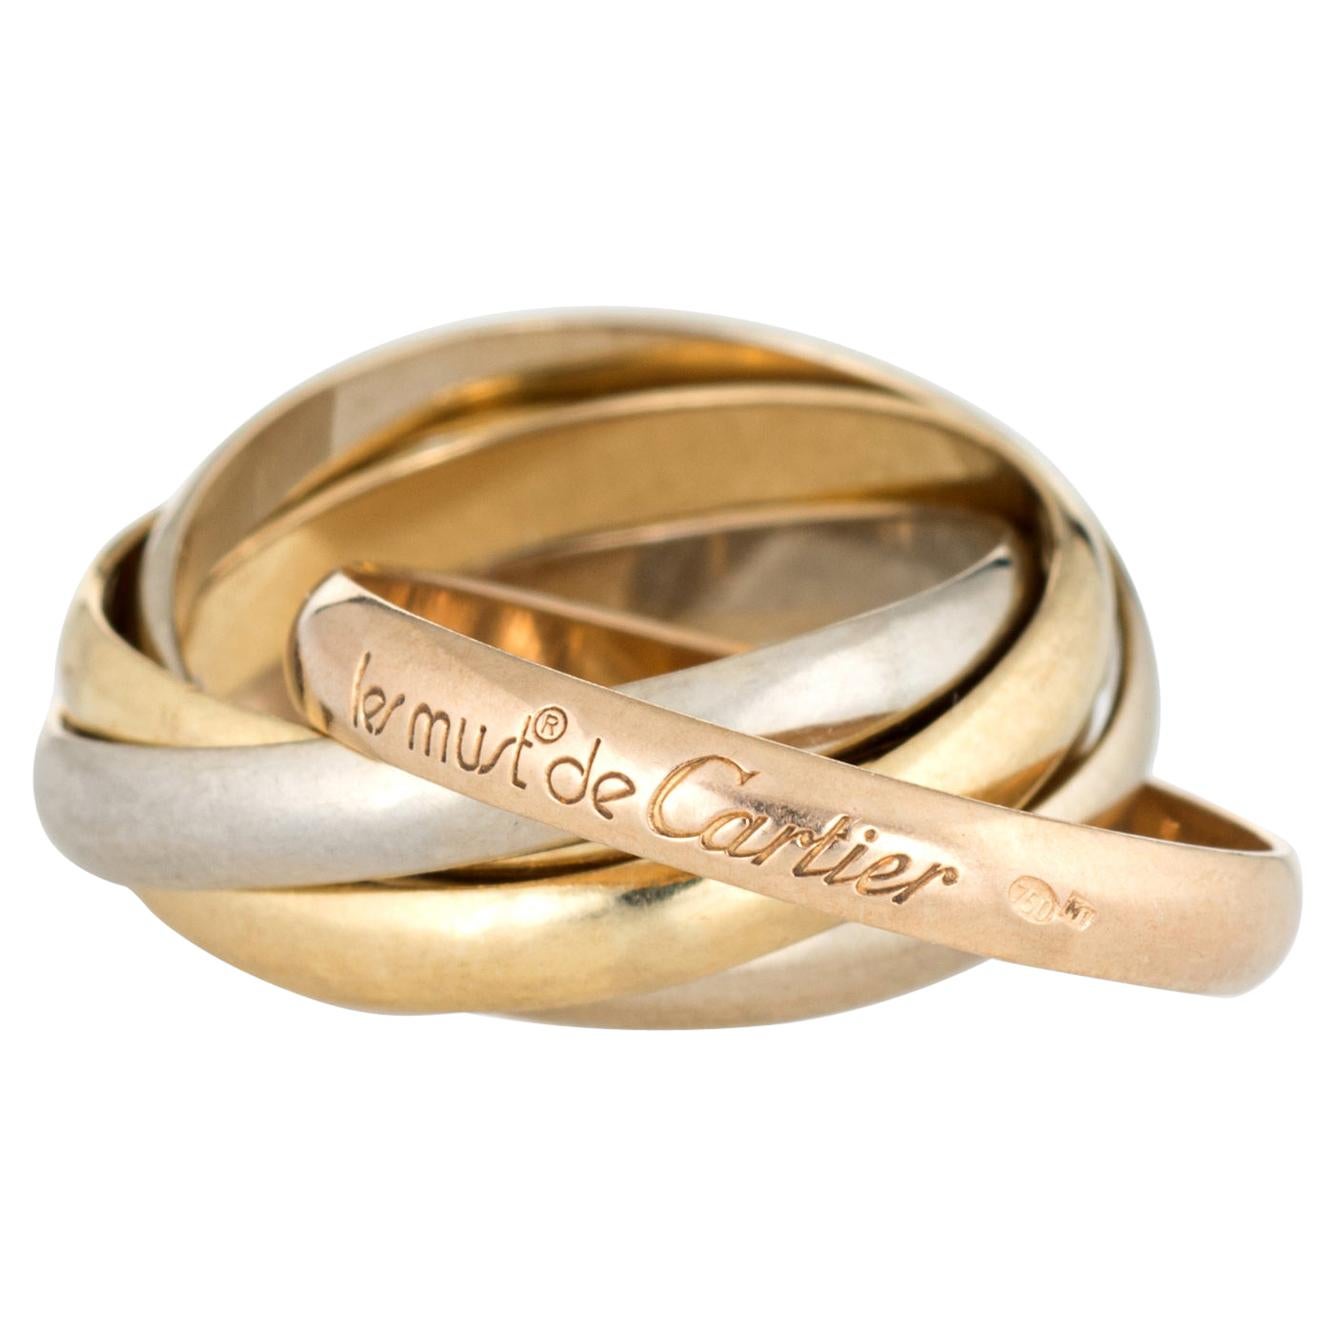 les must de Cartier 5-Band Trinity Ring 